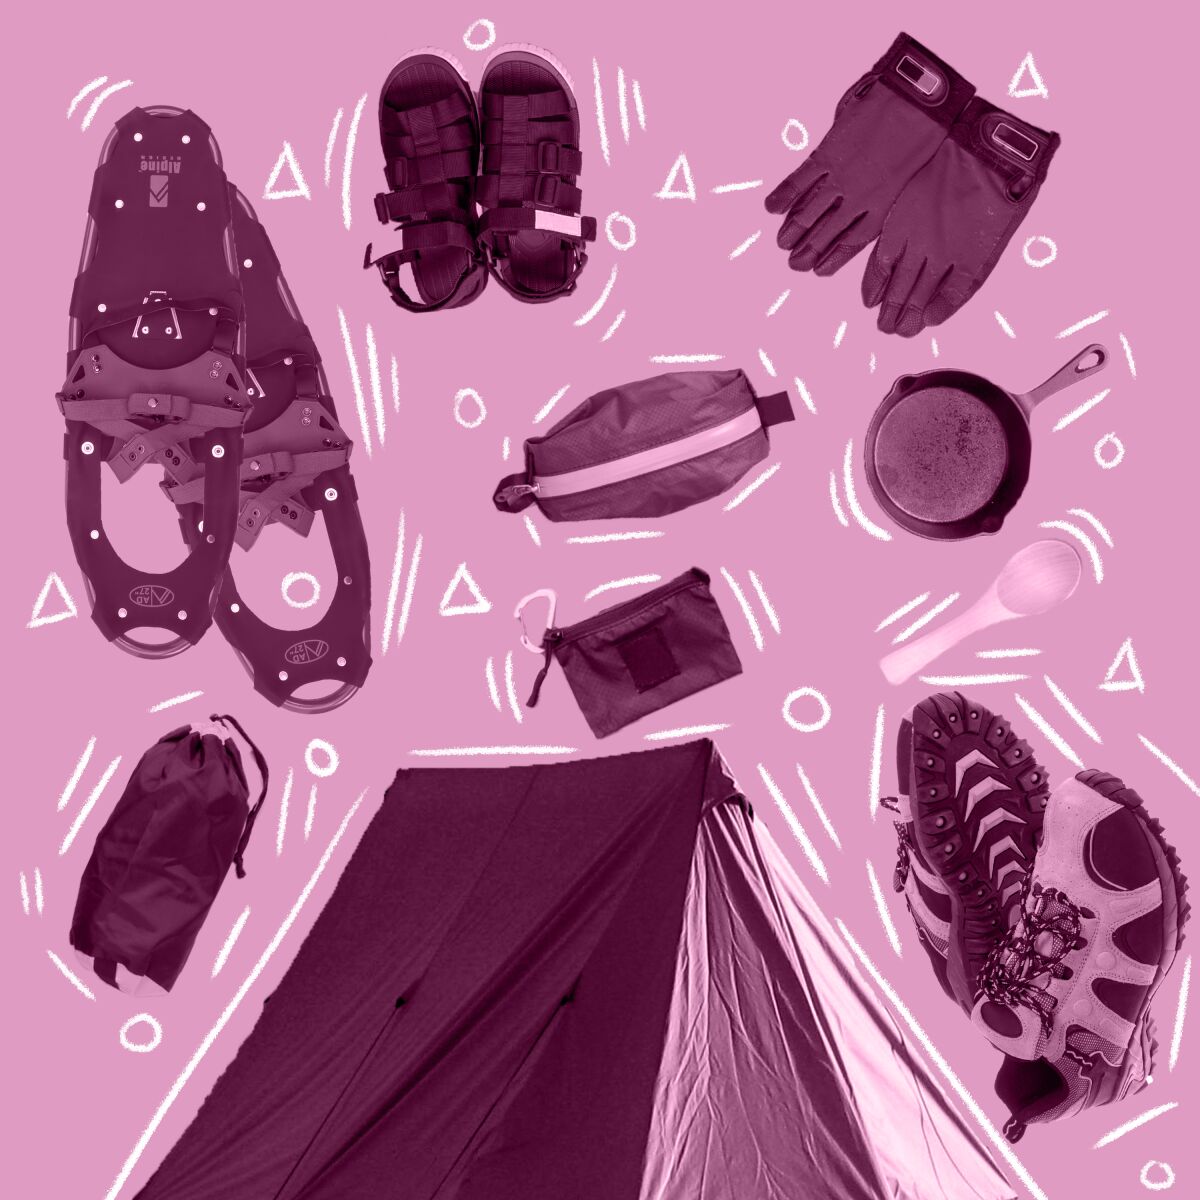 Illustration of tent, snowshoes and other gear